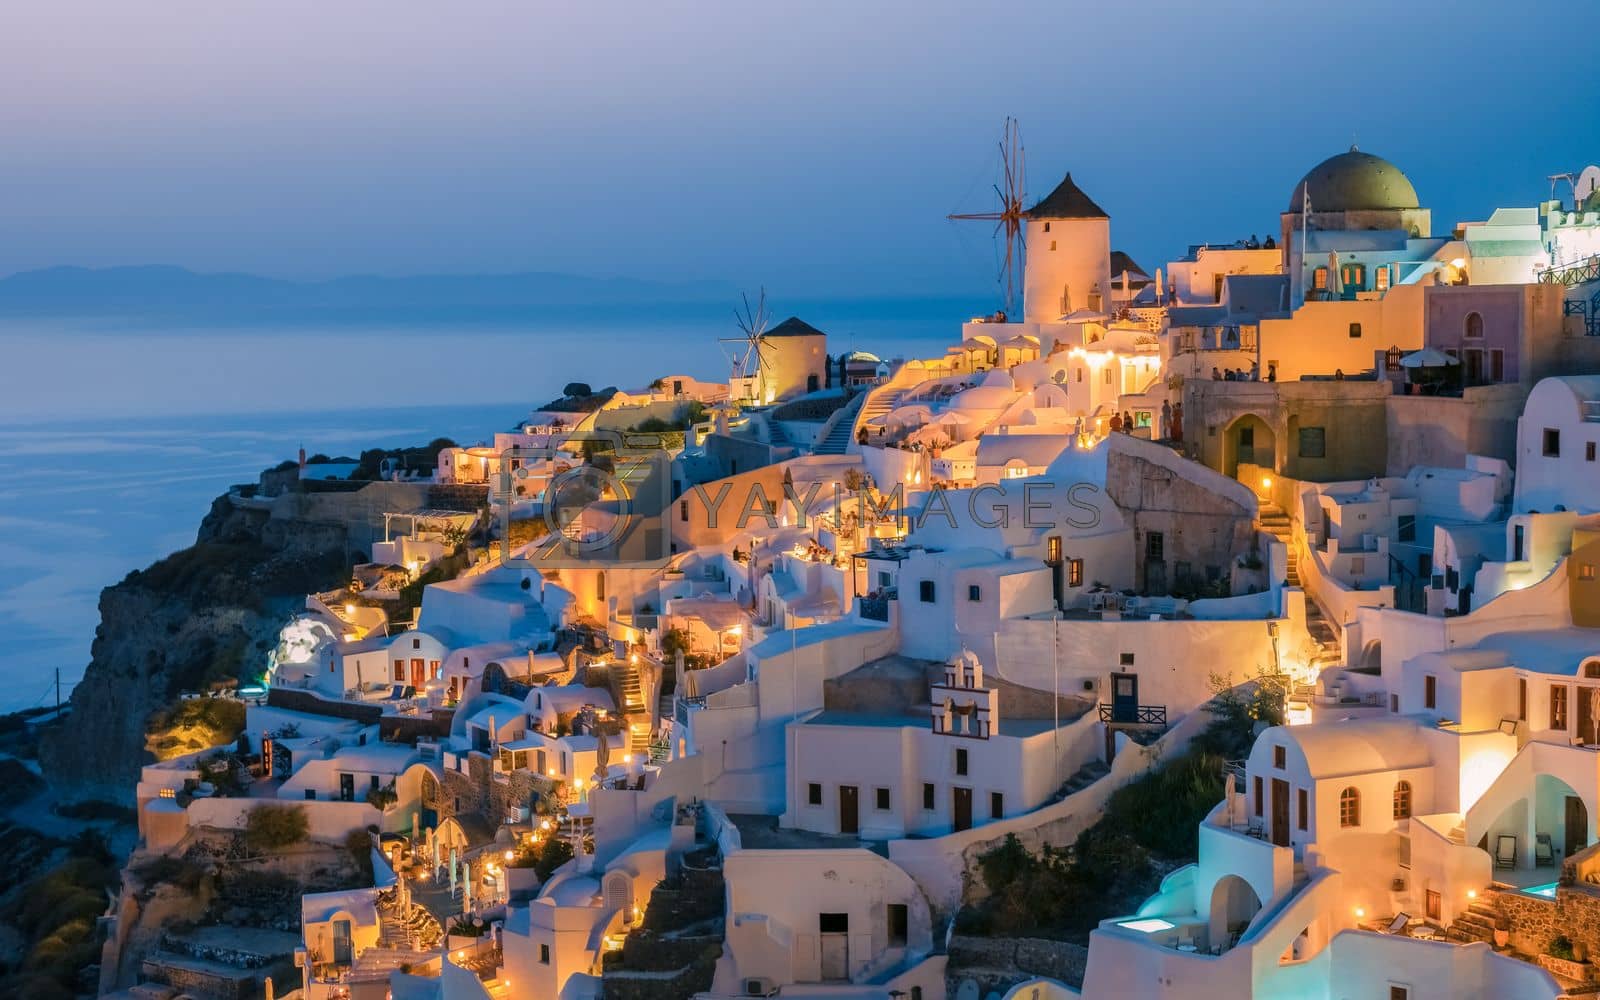 Royalty free image of Sunset at Oia Santorini Greece during summer with whitewashed homes and churches, Greek Island by fokkebok